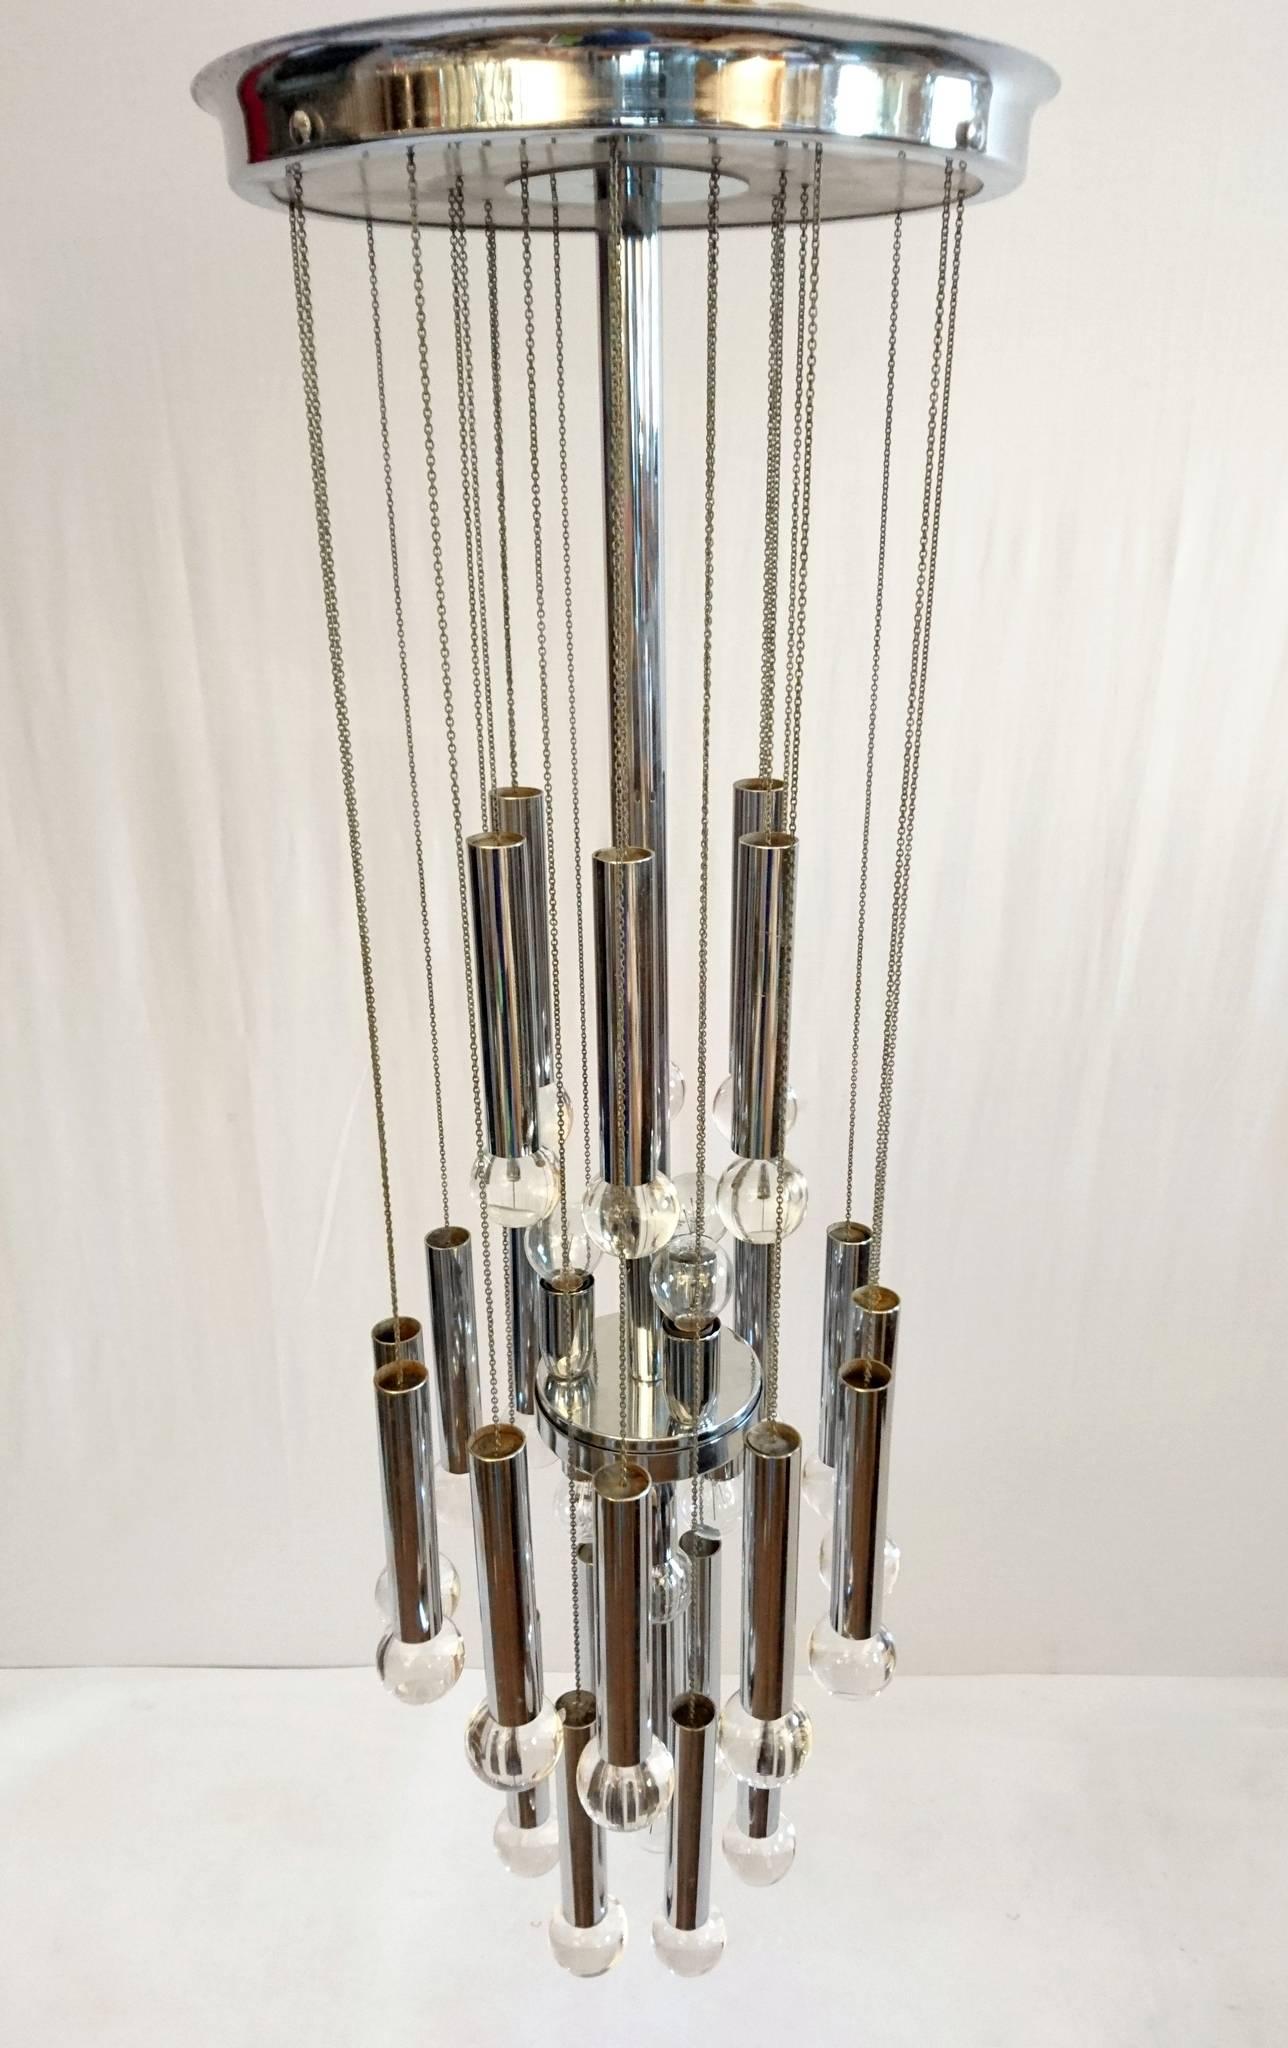 Slender chandelier by Gaetano Sciolari with 24 solid glass balls hanging in chains. All in chrome and made for seven light bulbs.